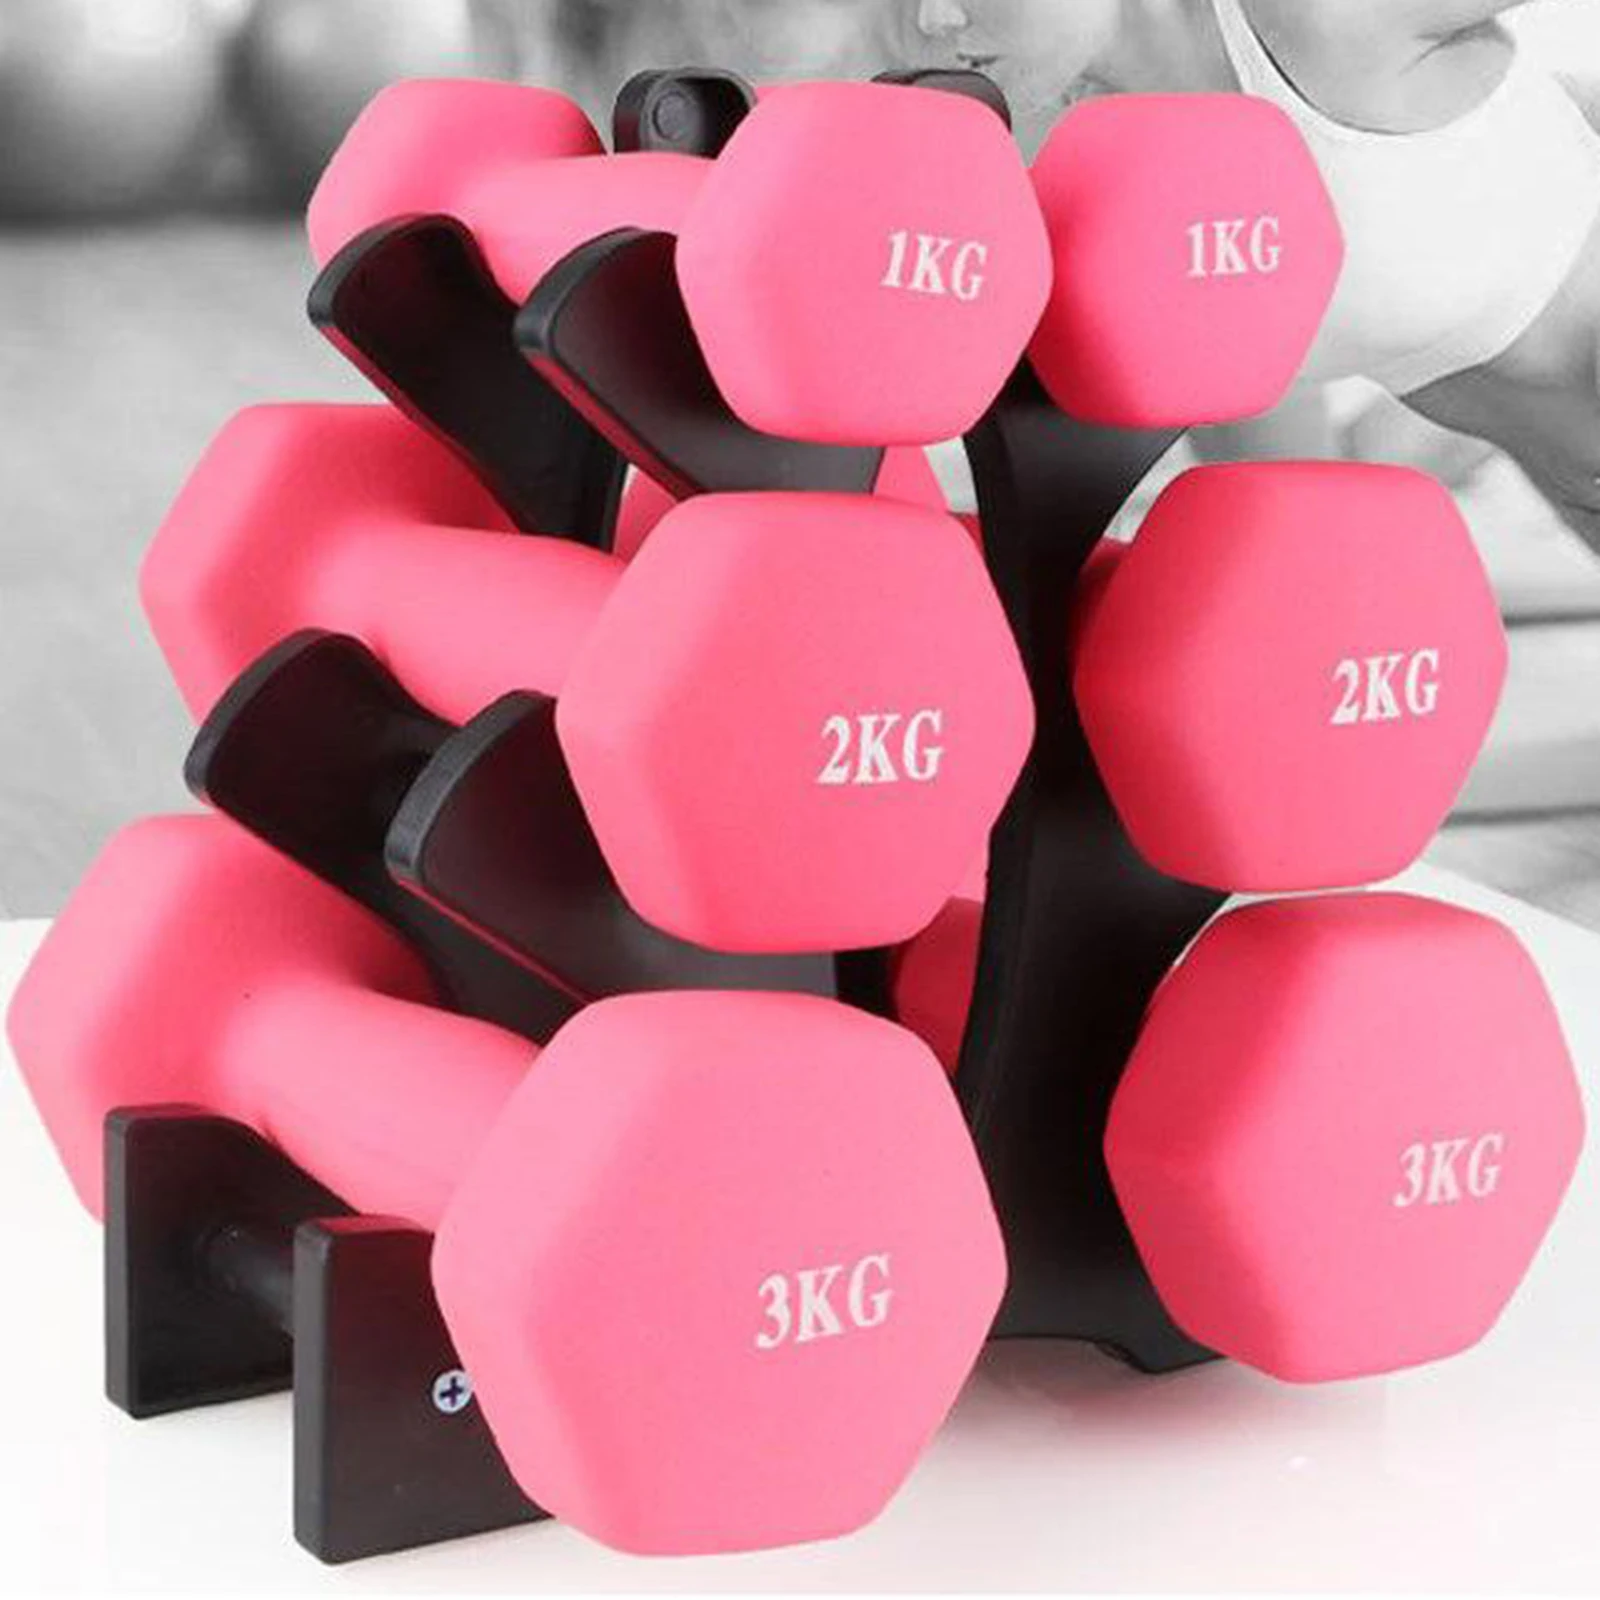 Dumbbell Rack Hand Weights Holder Organizer Tree Stand Sorting Accessories